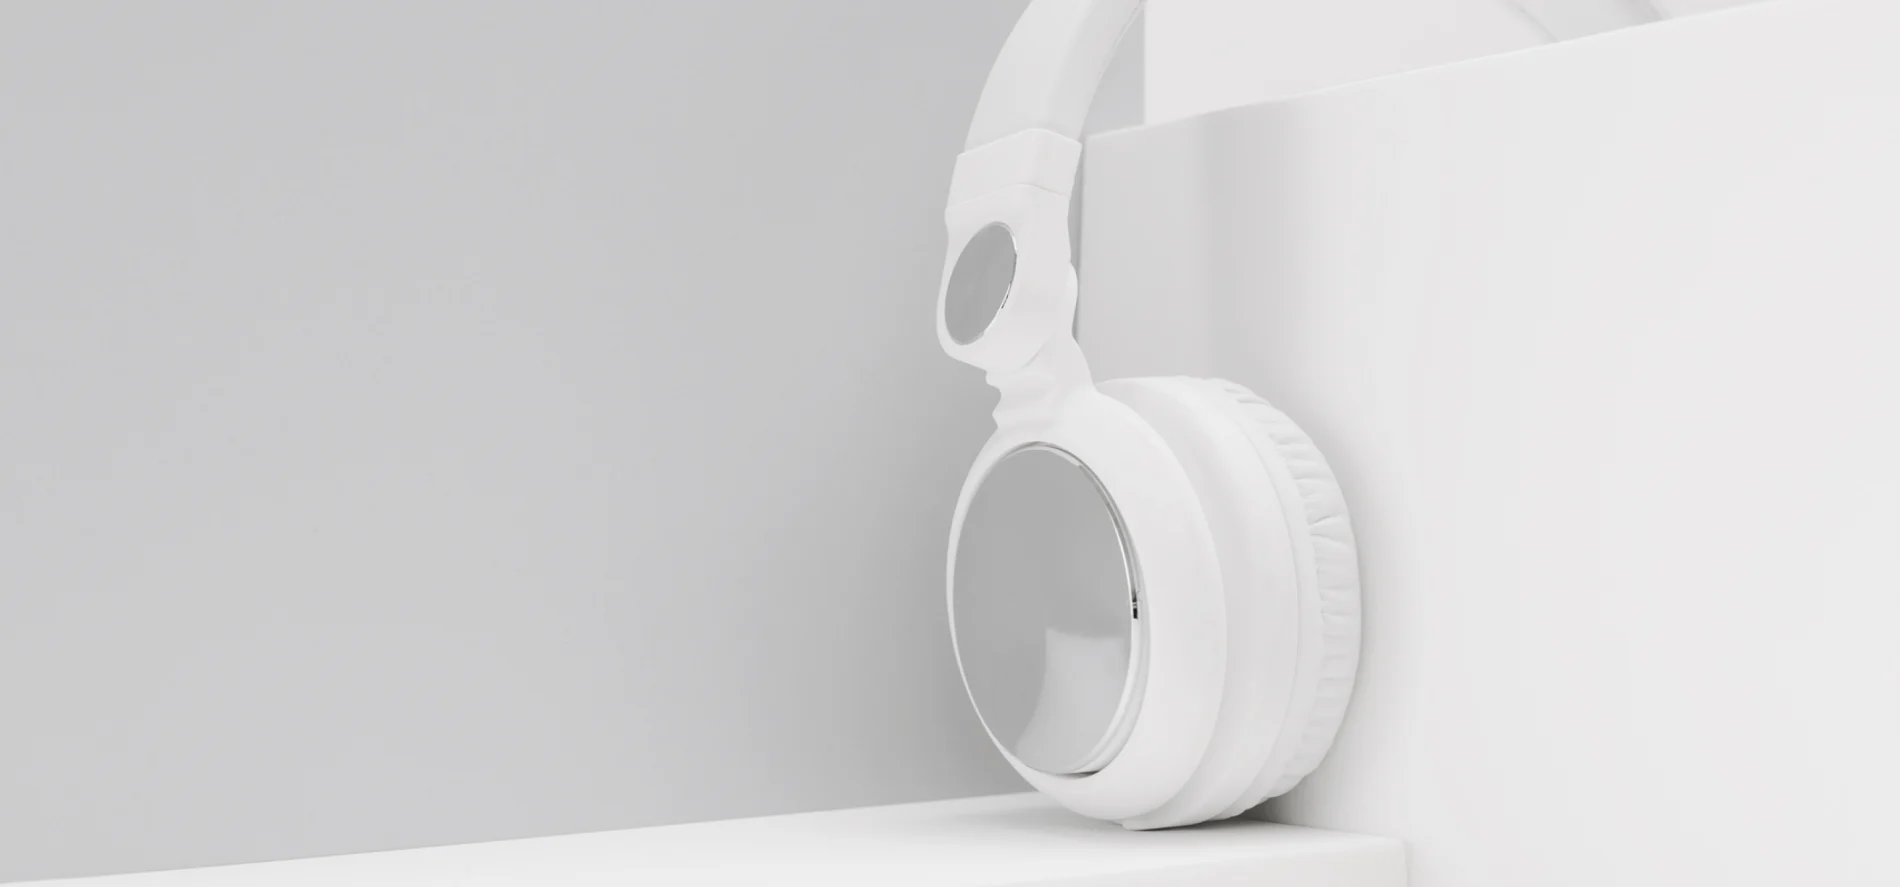 Image of a white headphone balancing on a white divider